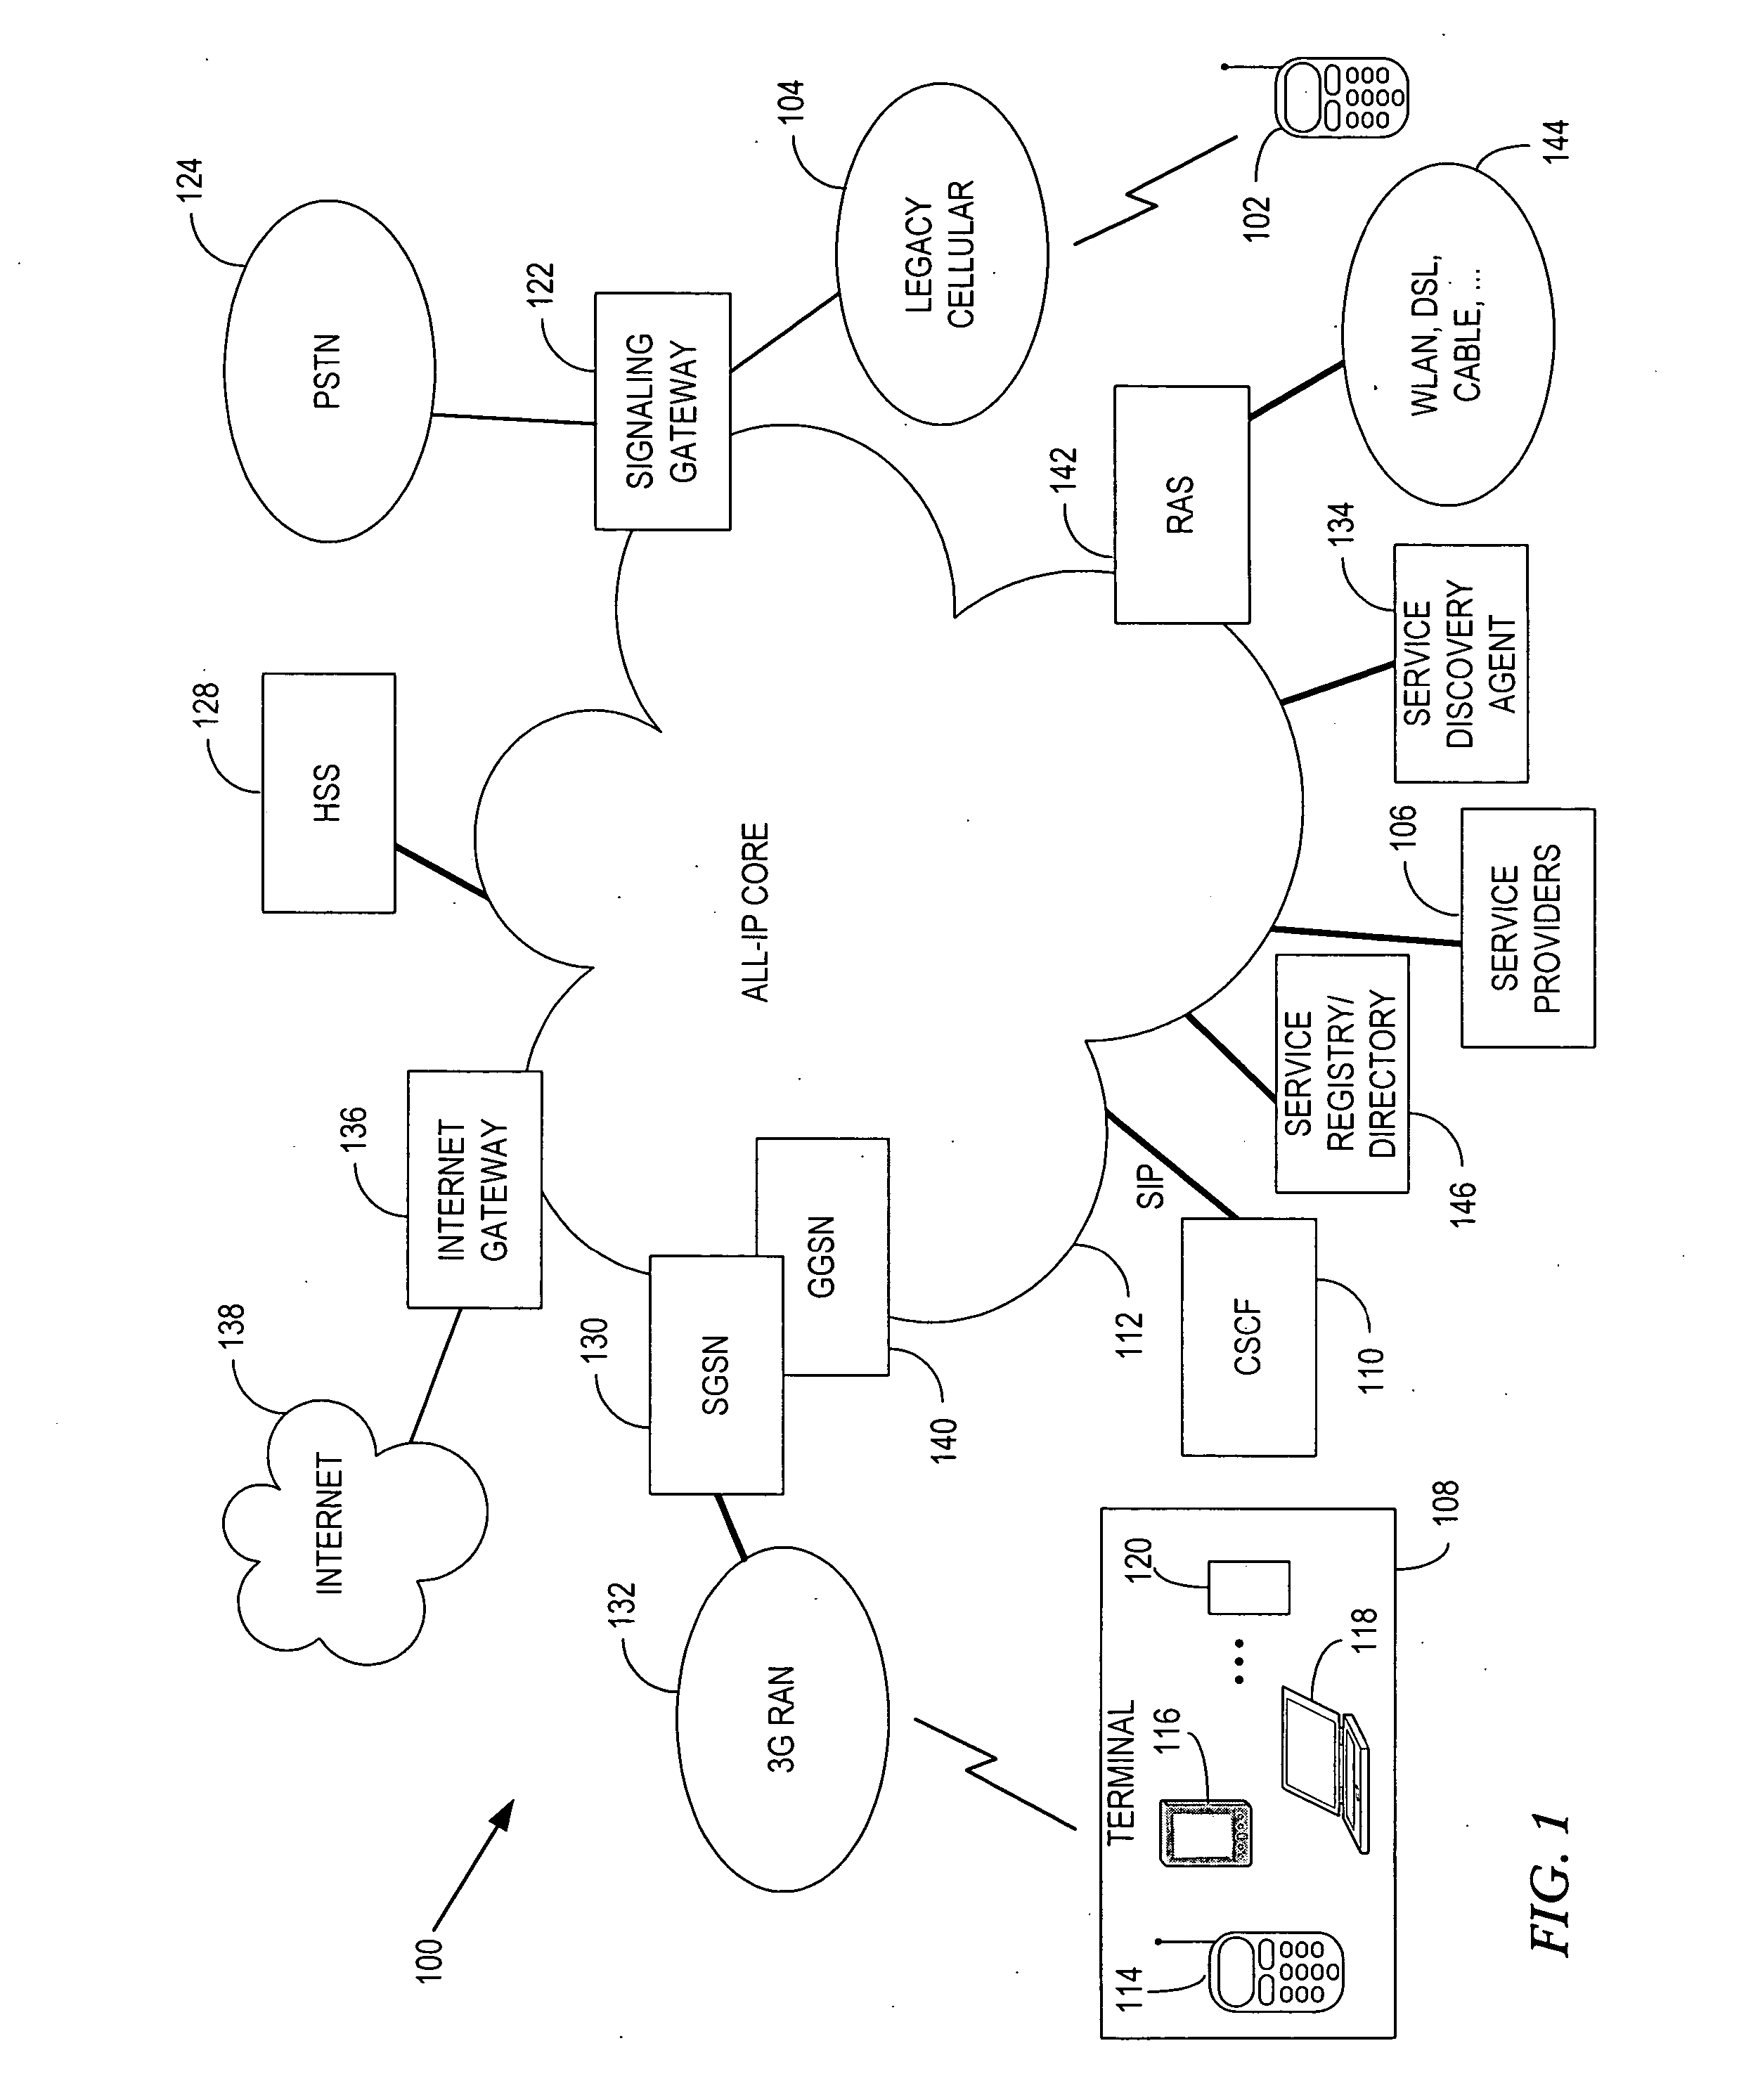 System and method for providing a unified framework for service discovery